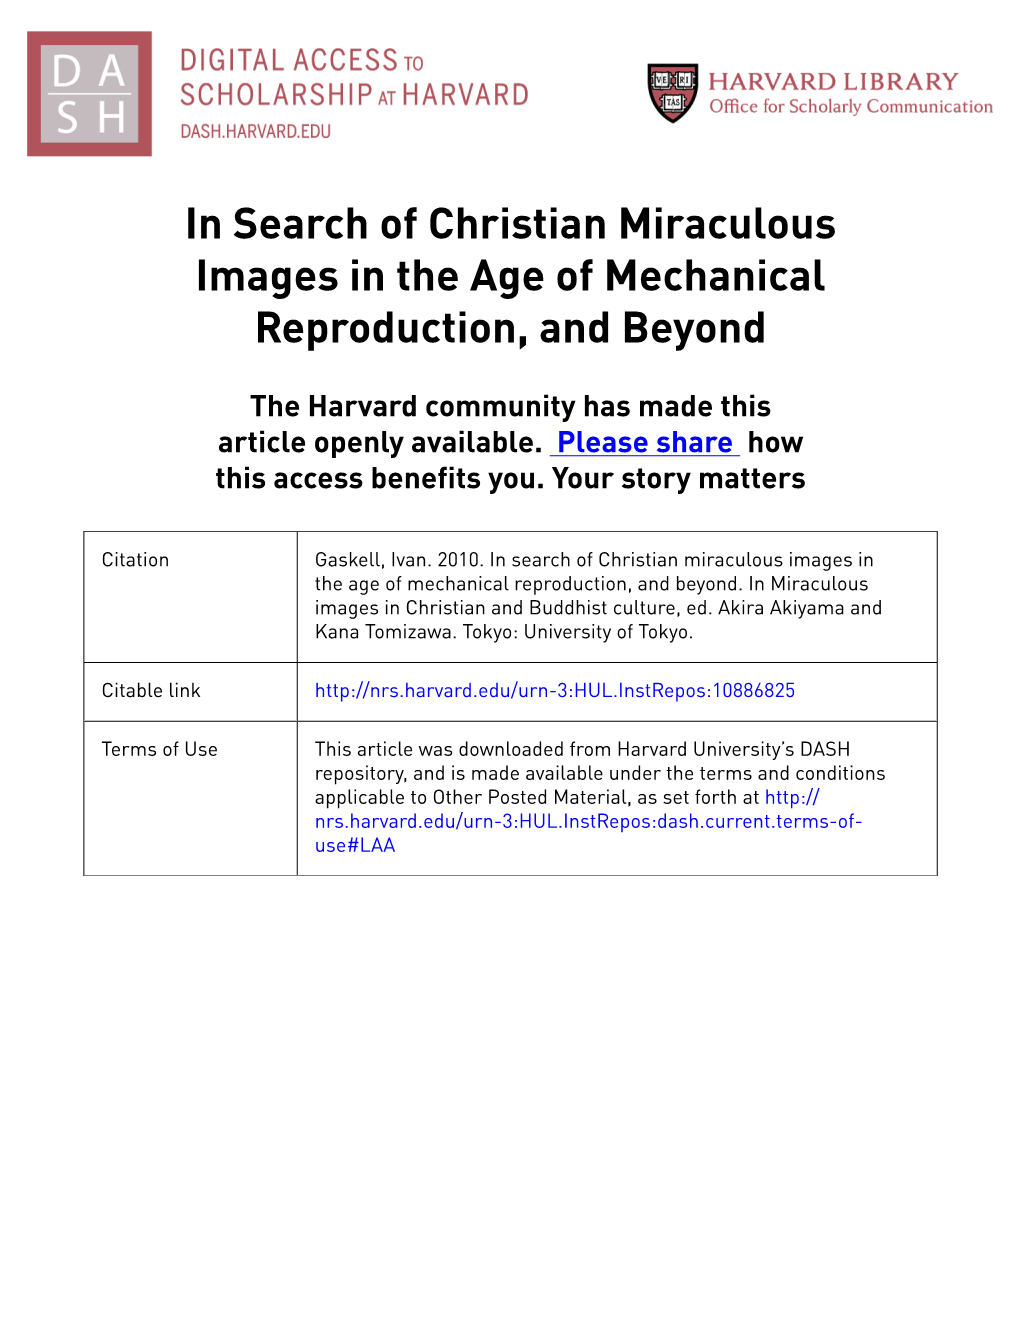 In Search of Christian Miraculous Images in the Age of Mechanical Reproduction, and Beyond